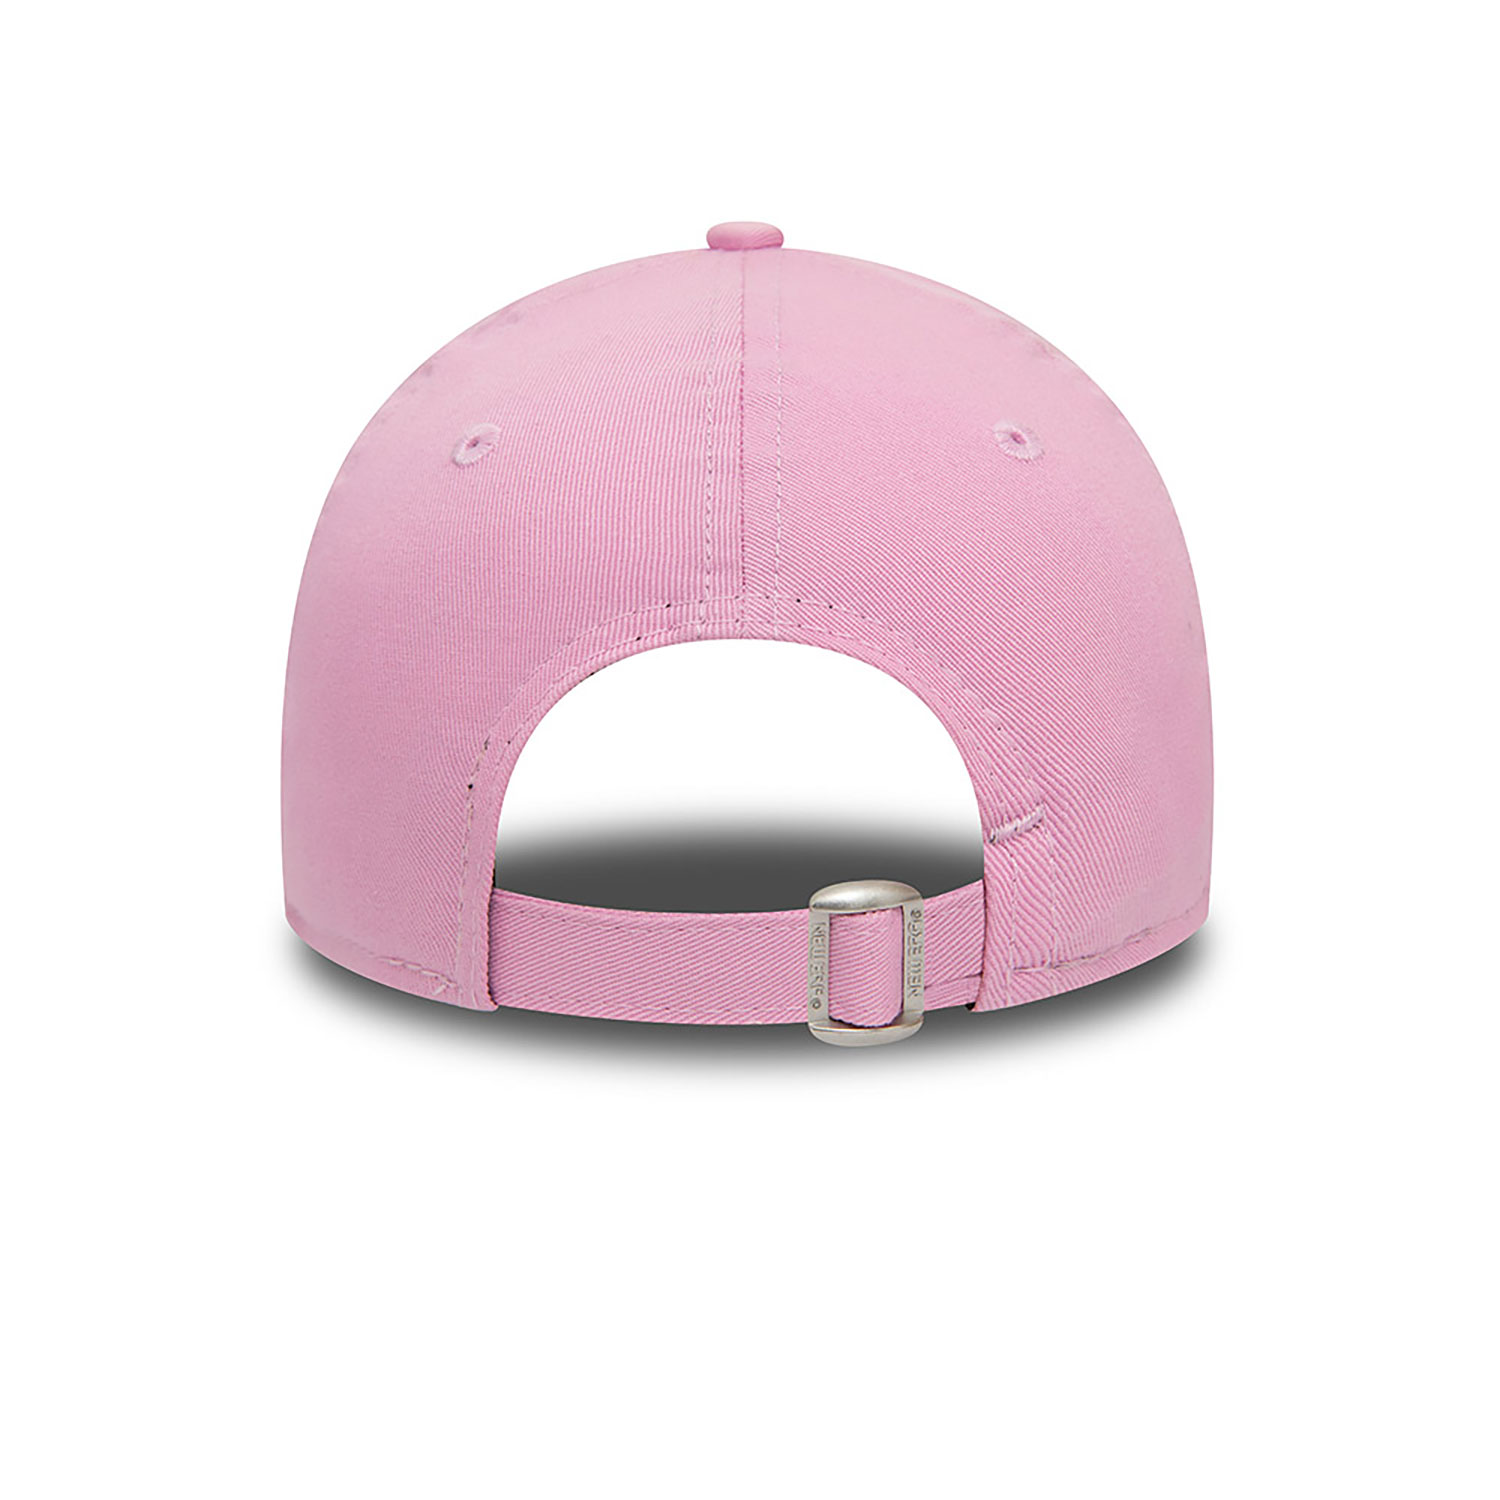 New York Yankees Youth League Essential Pink 9FORTY Adjustable Cap